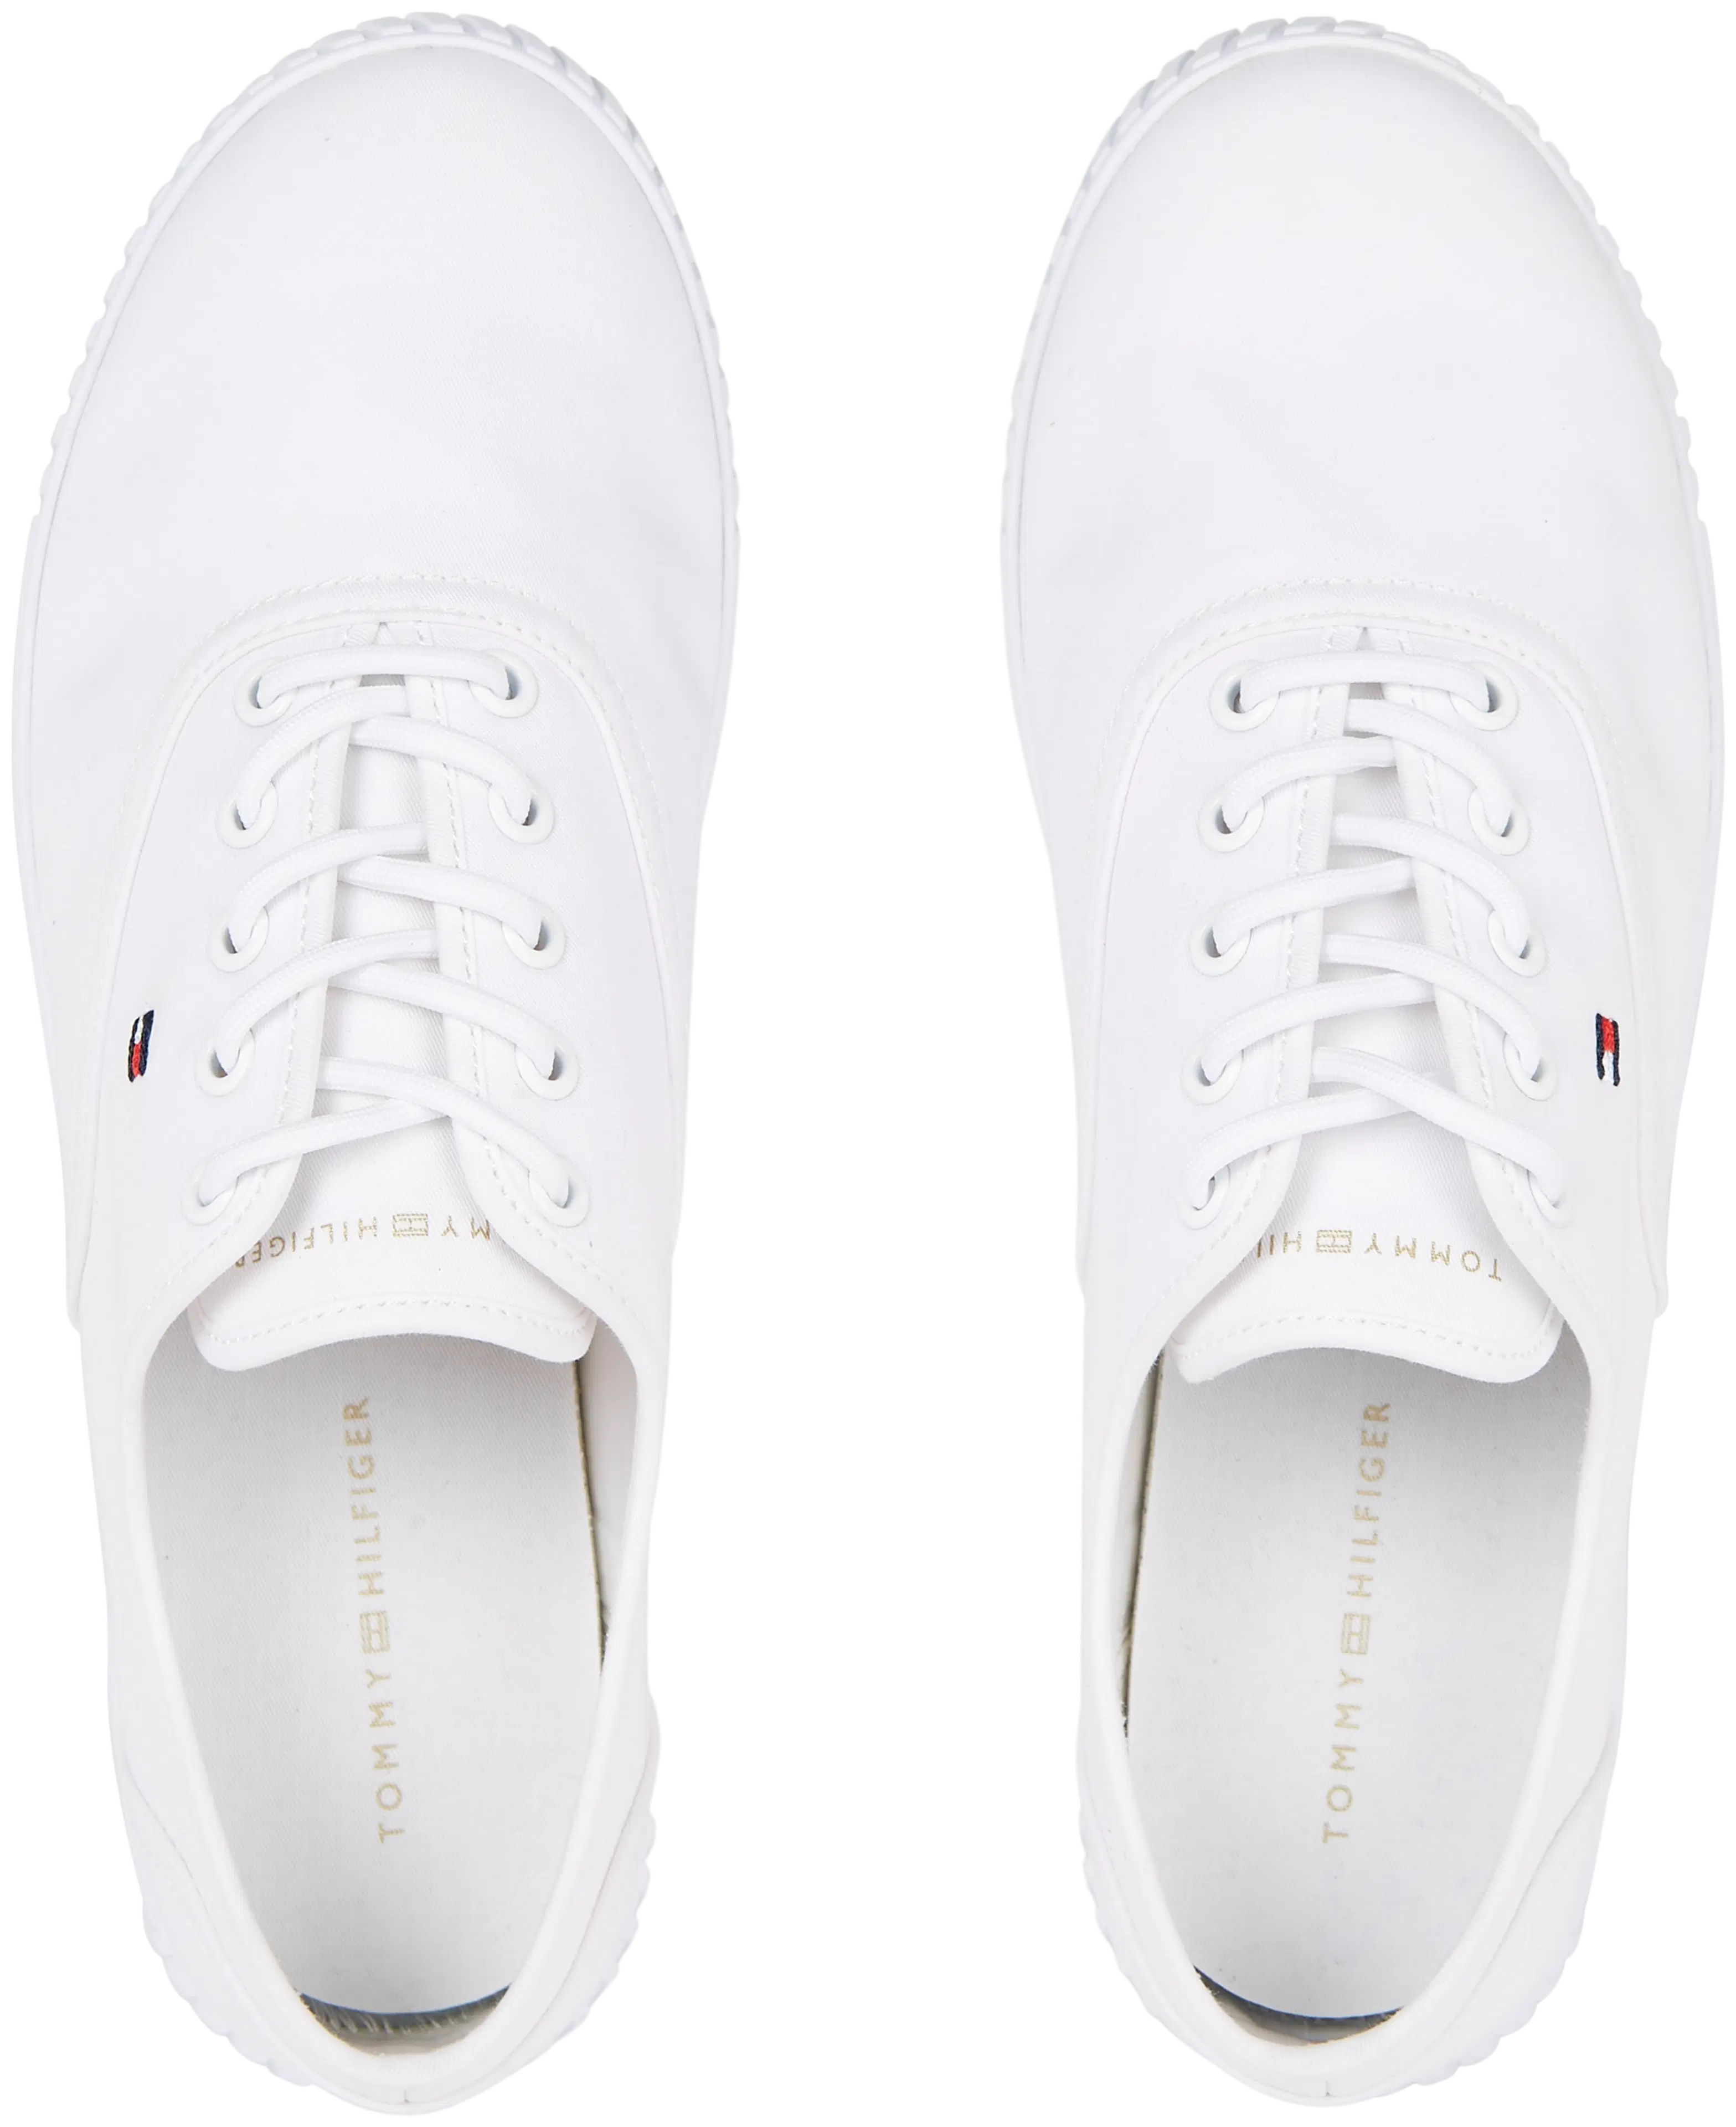 Tommy Hilfiger Canvas Lace Up tennarit